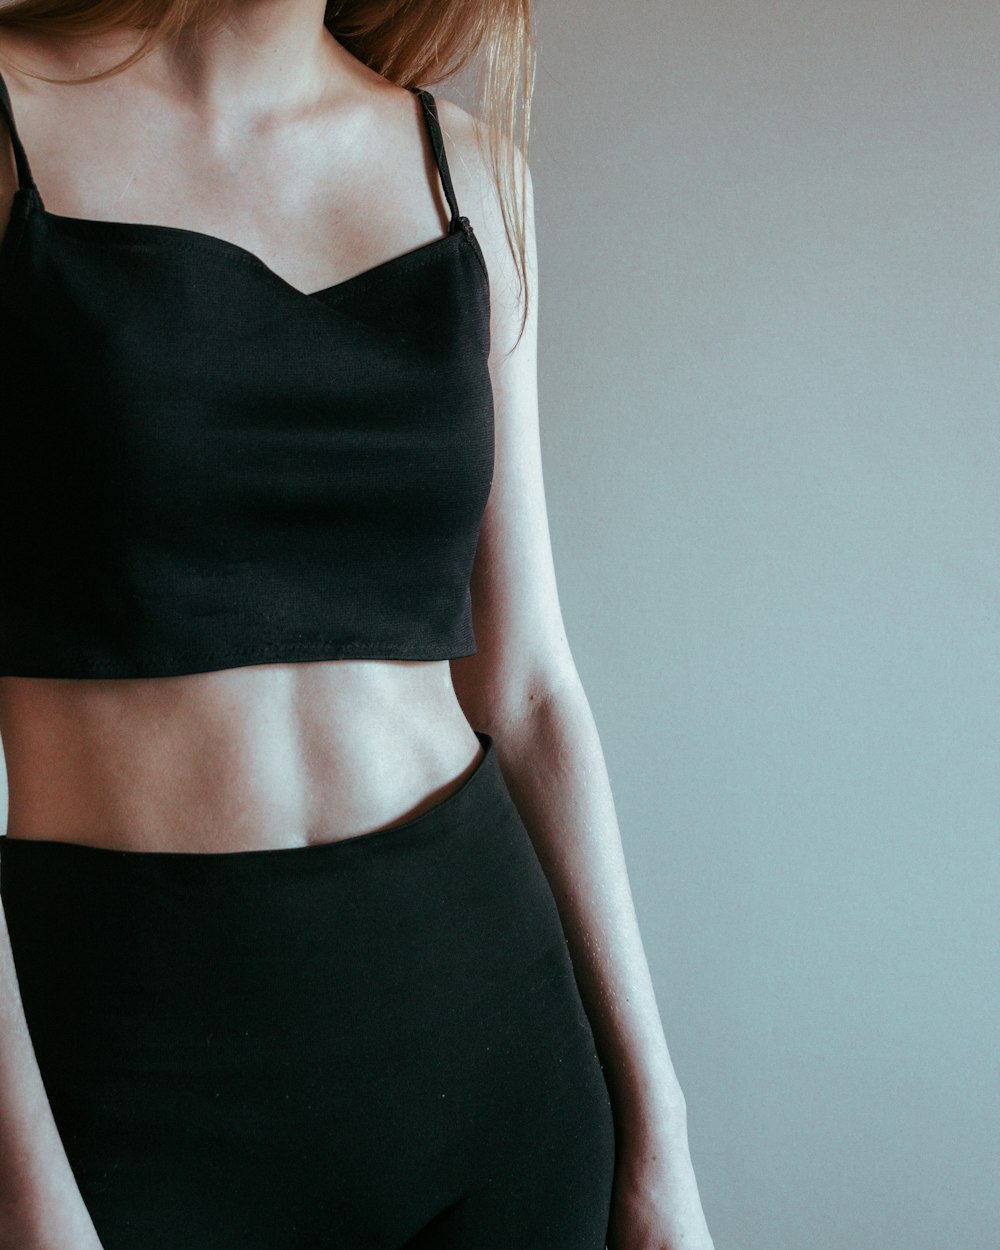 a woman wearing a black crop top and black leggings